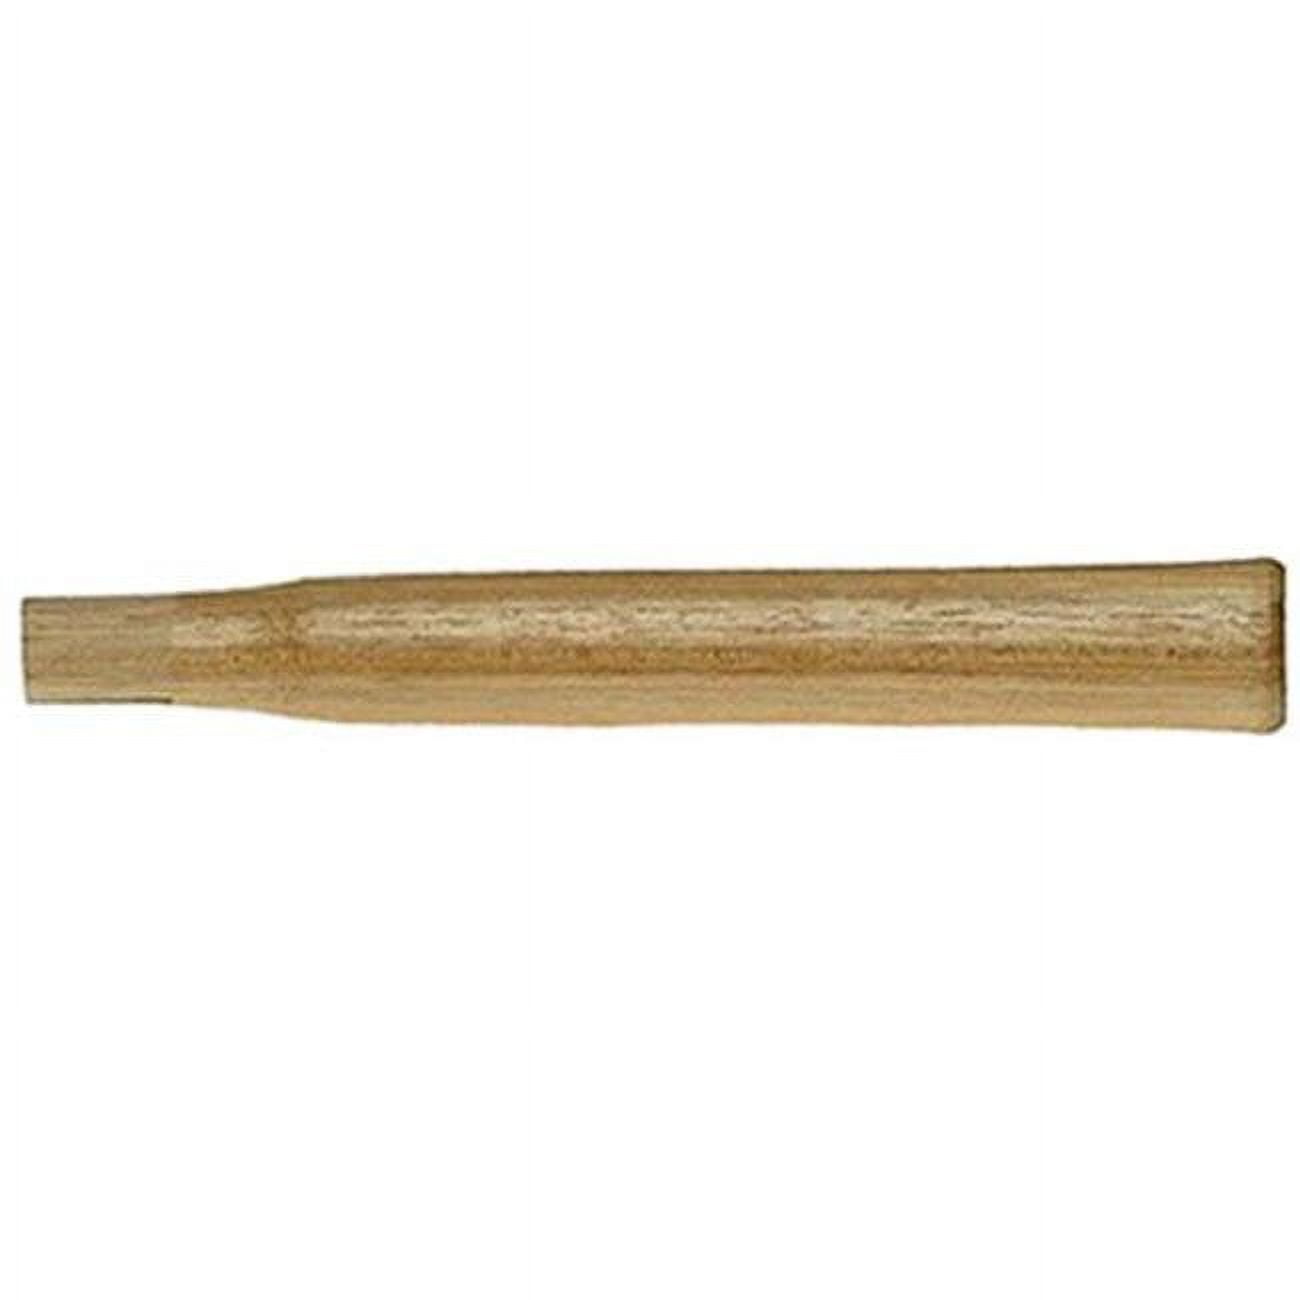 63035 Drilling Hammer Handle - 9.5 In.